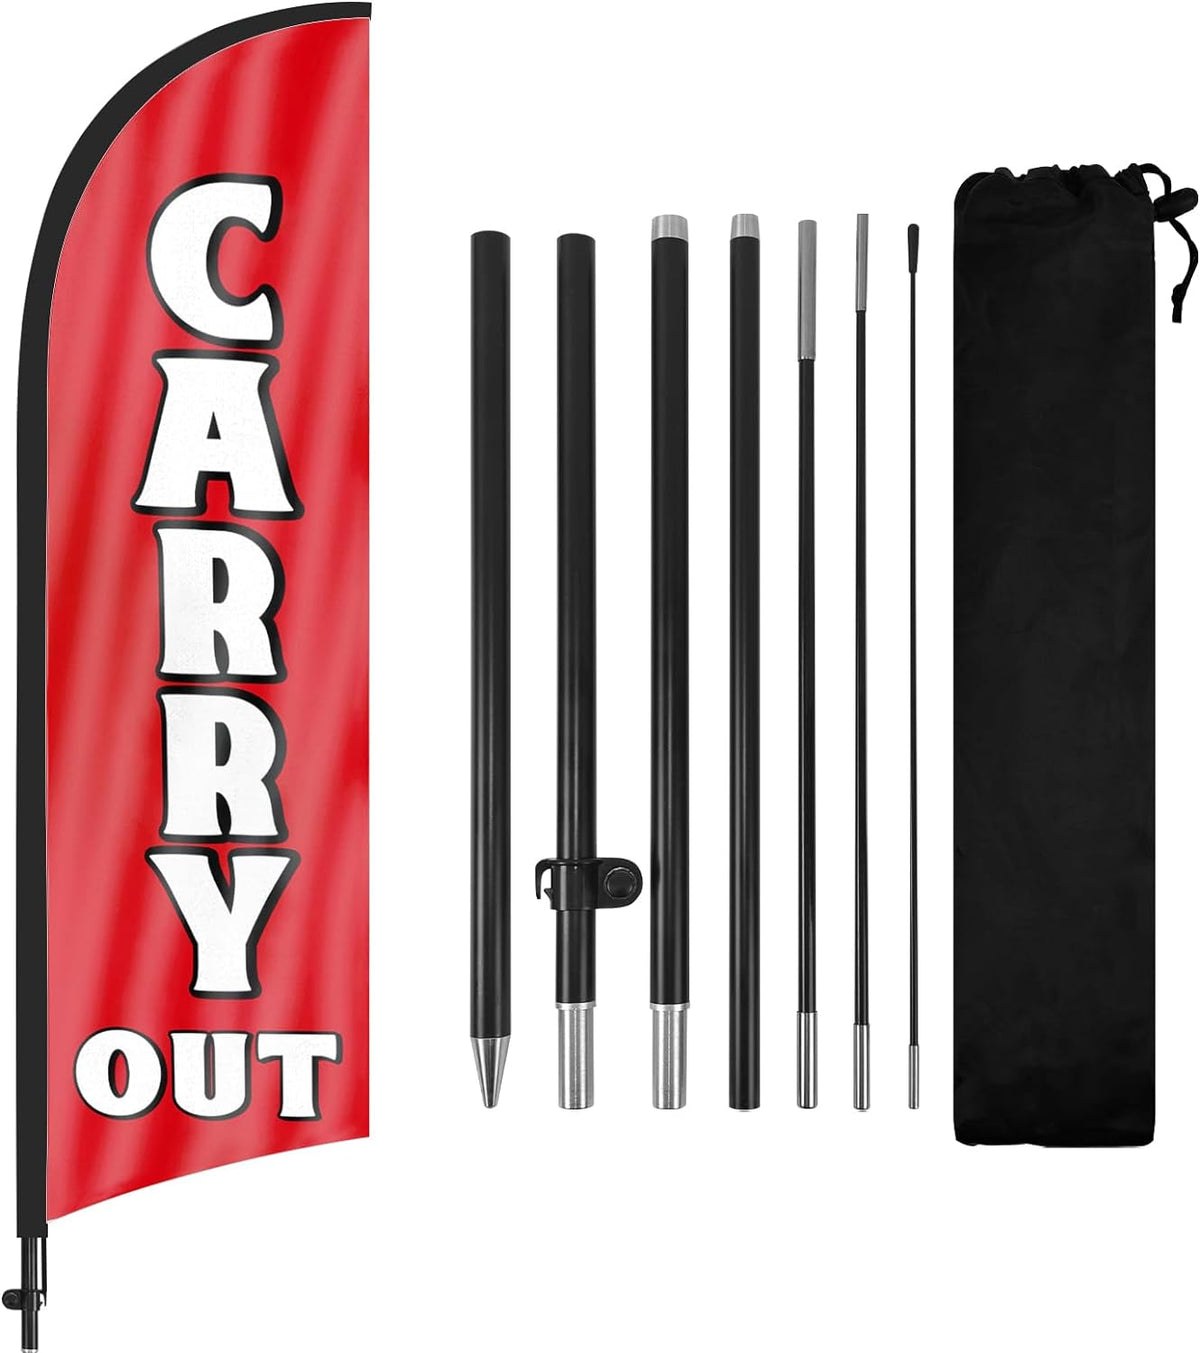 8ft Carry Out Feather Flag Kit - Advertising Banner with Pole and Stake